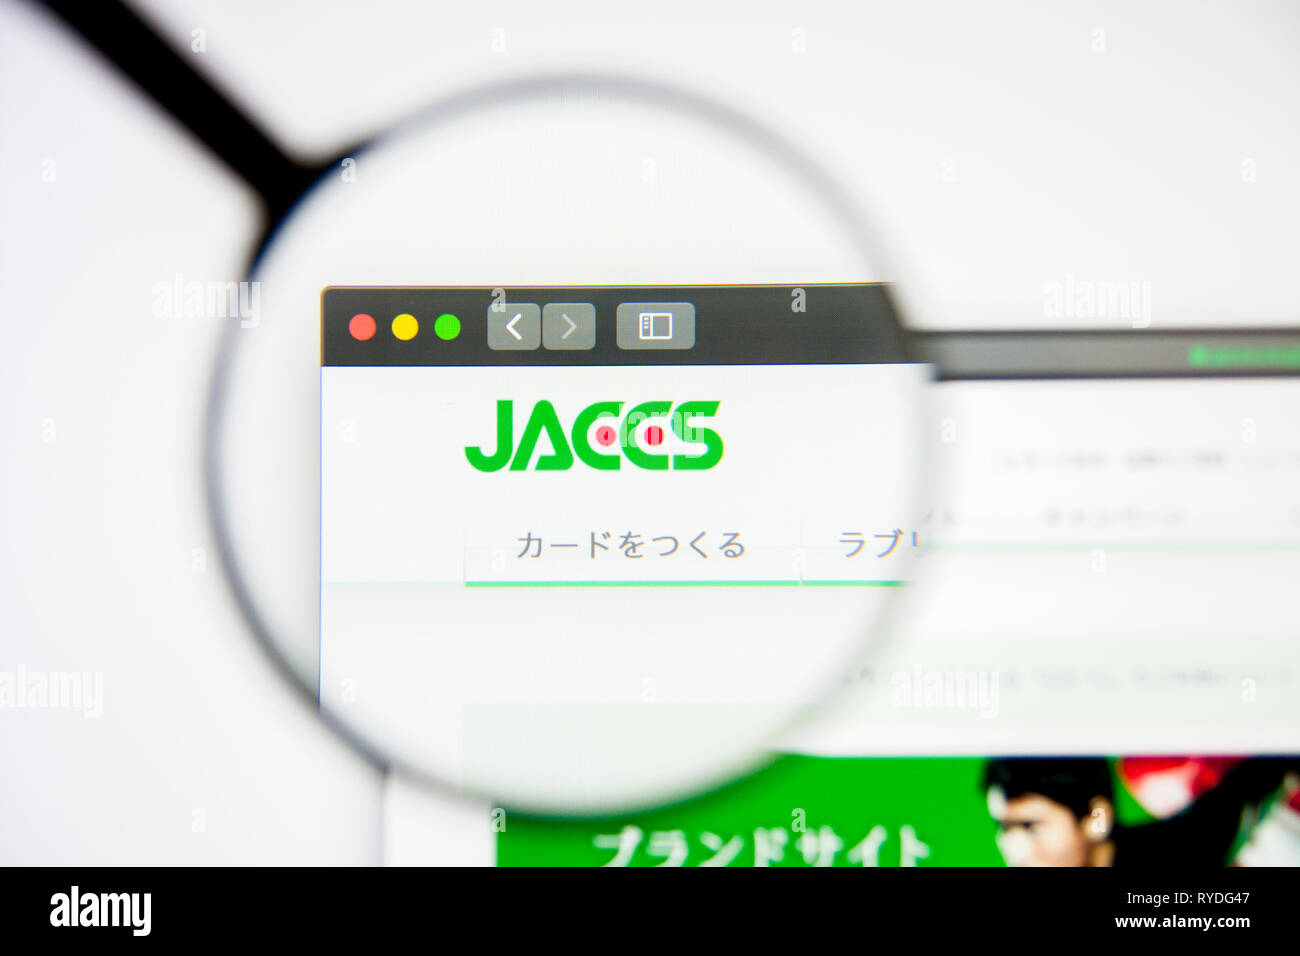 Los Angeles, California, USA - 5 March 2019: Jaccs website homepage. Jaccs logo visible on display screen, Illustrative Editorial Stock Photo